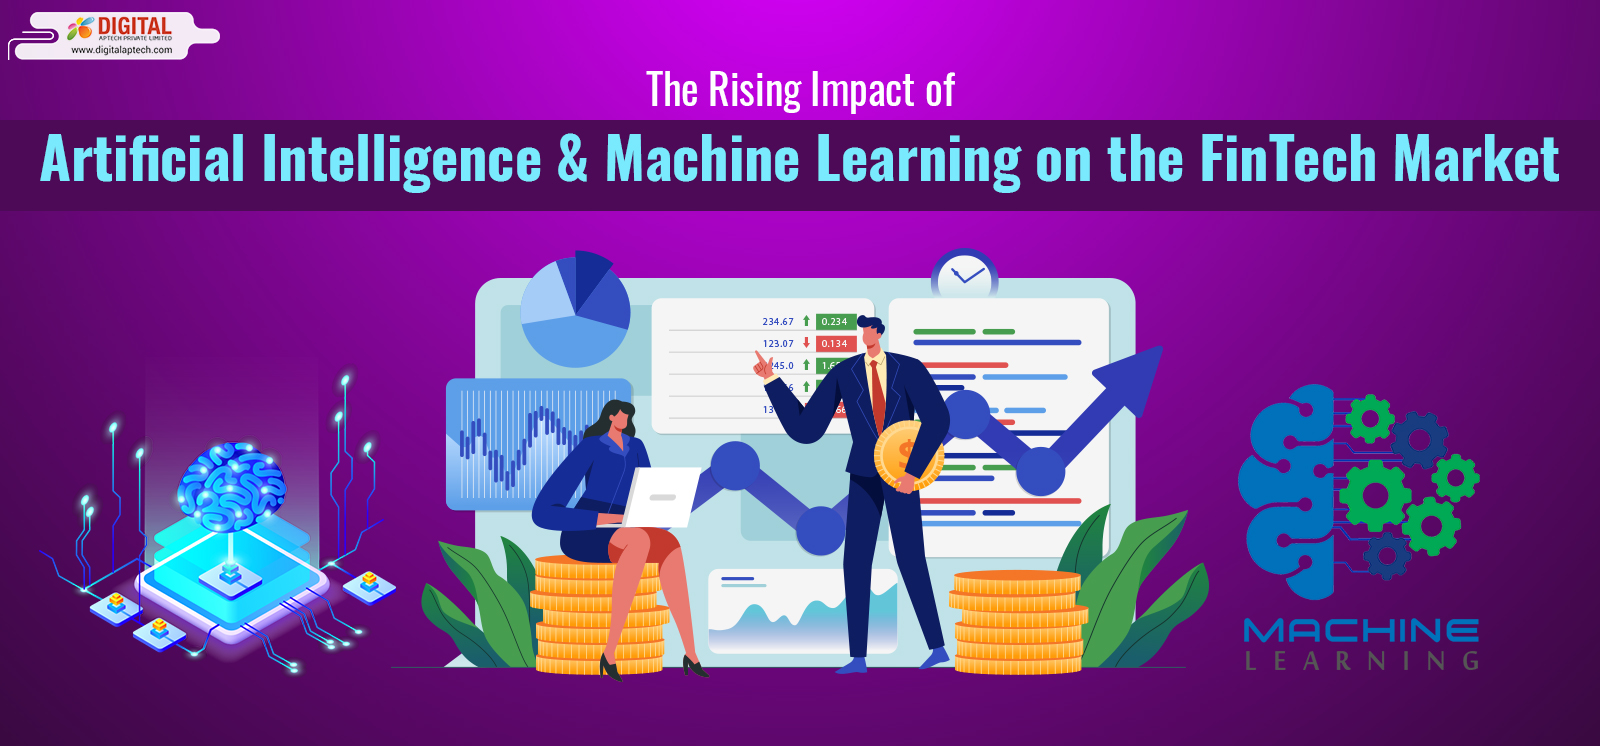 The Rising Impact of Artificial Intelligence & Machine Learning on the FinTech Market